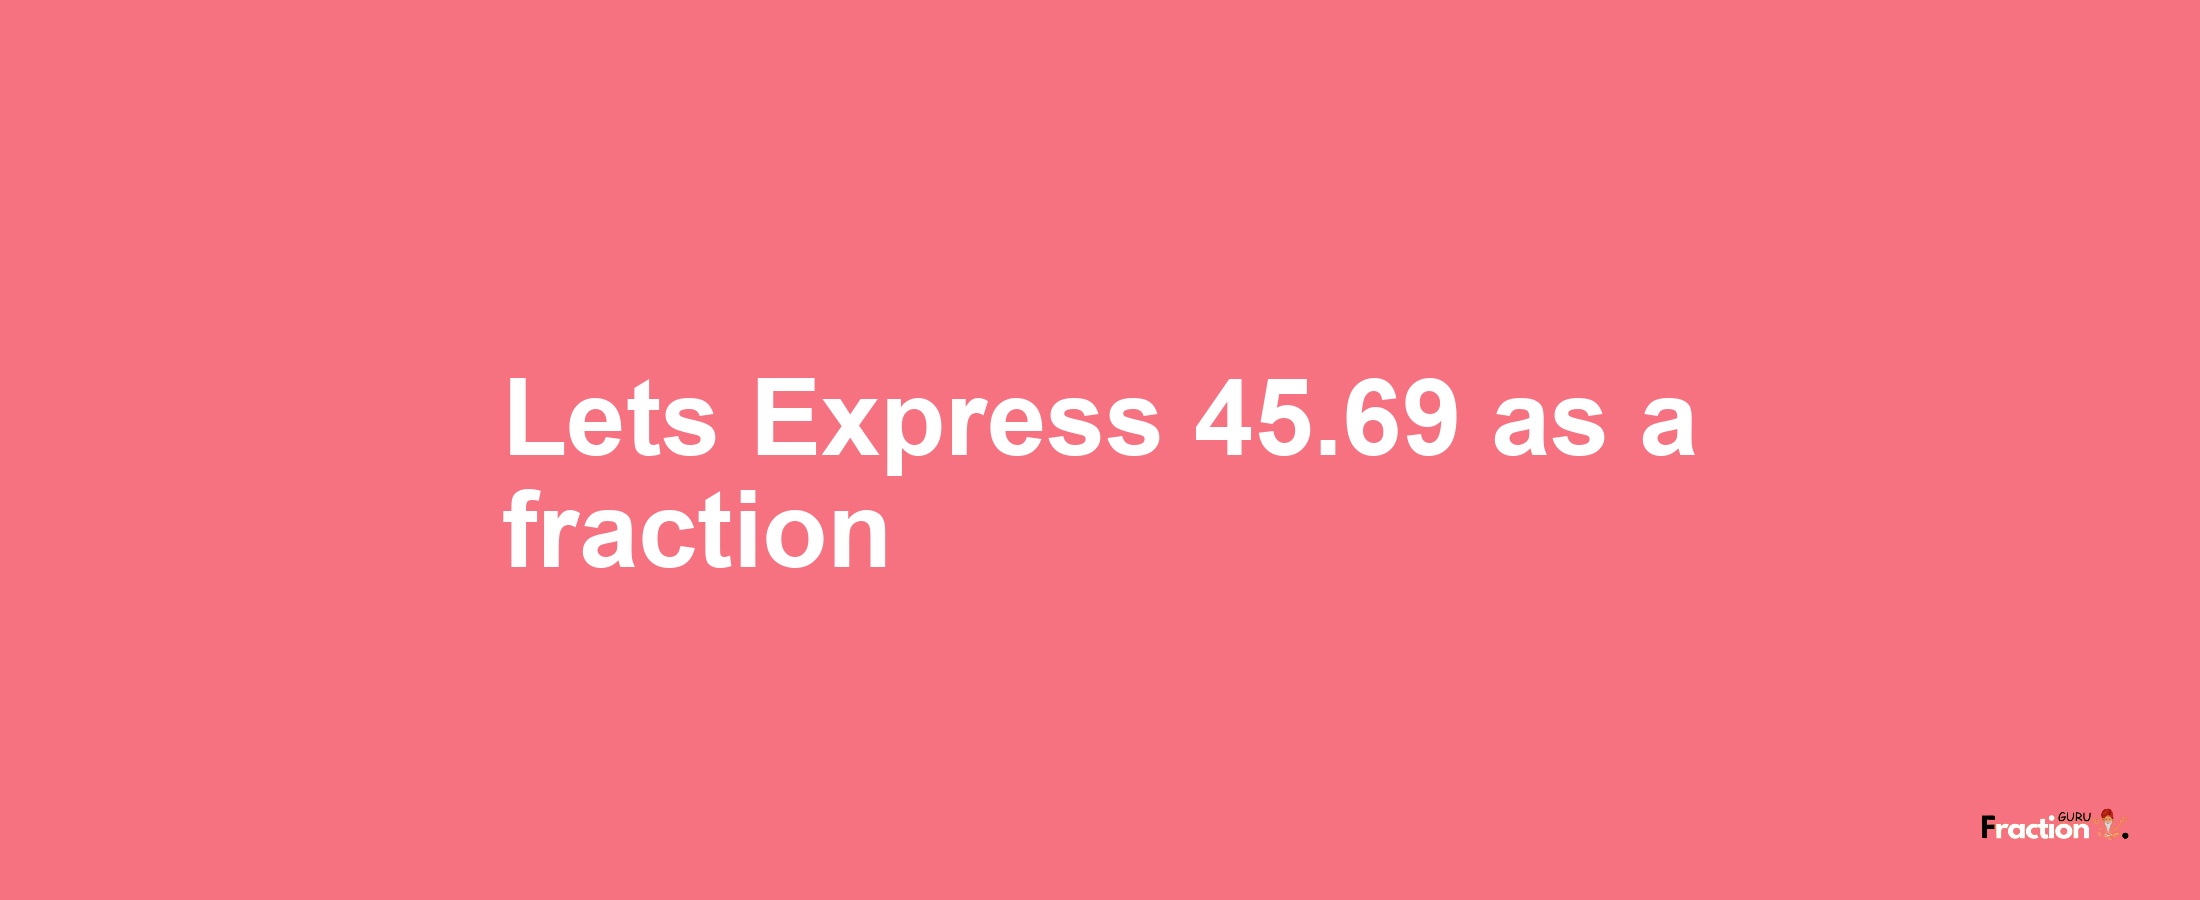 Lets Express 45.69 as afraction